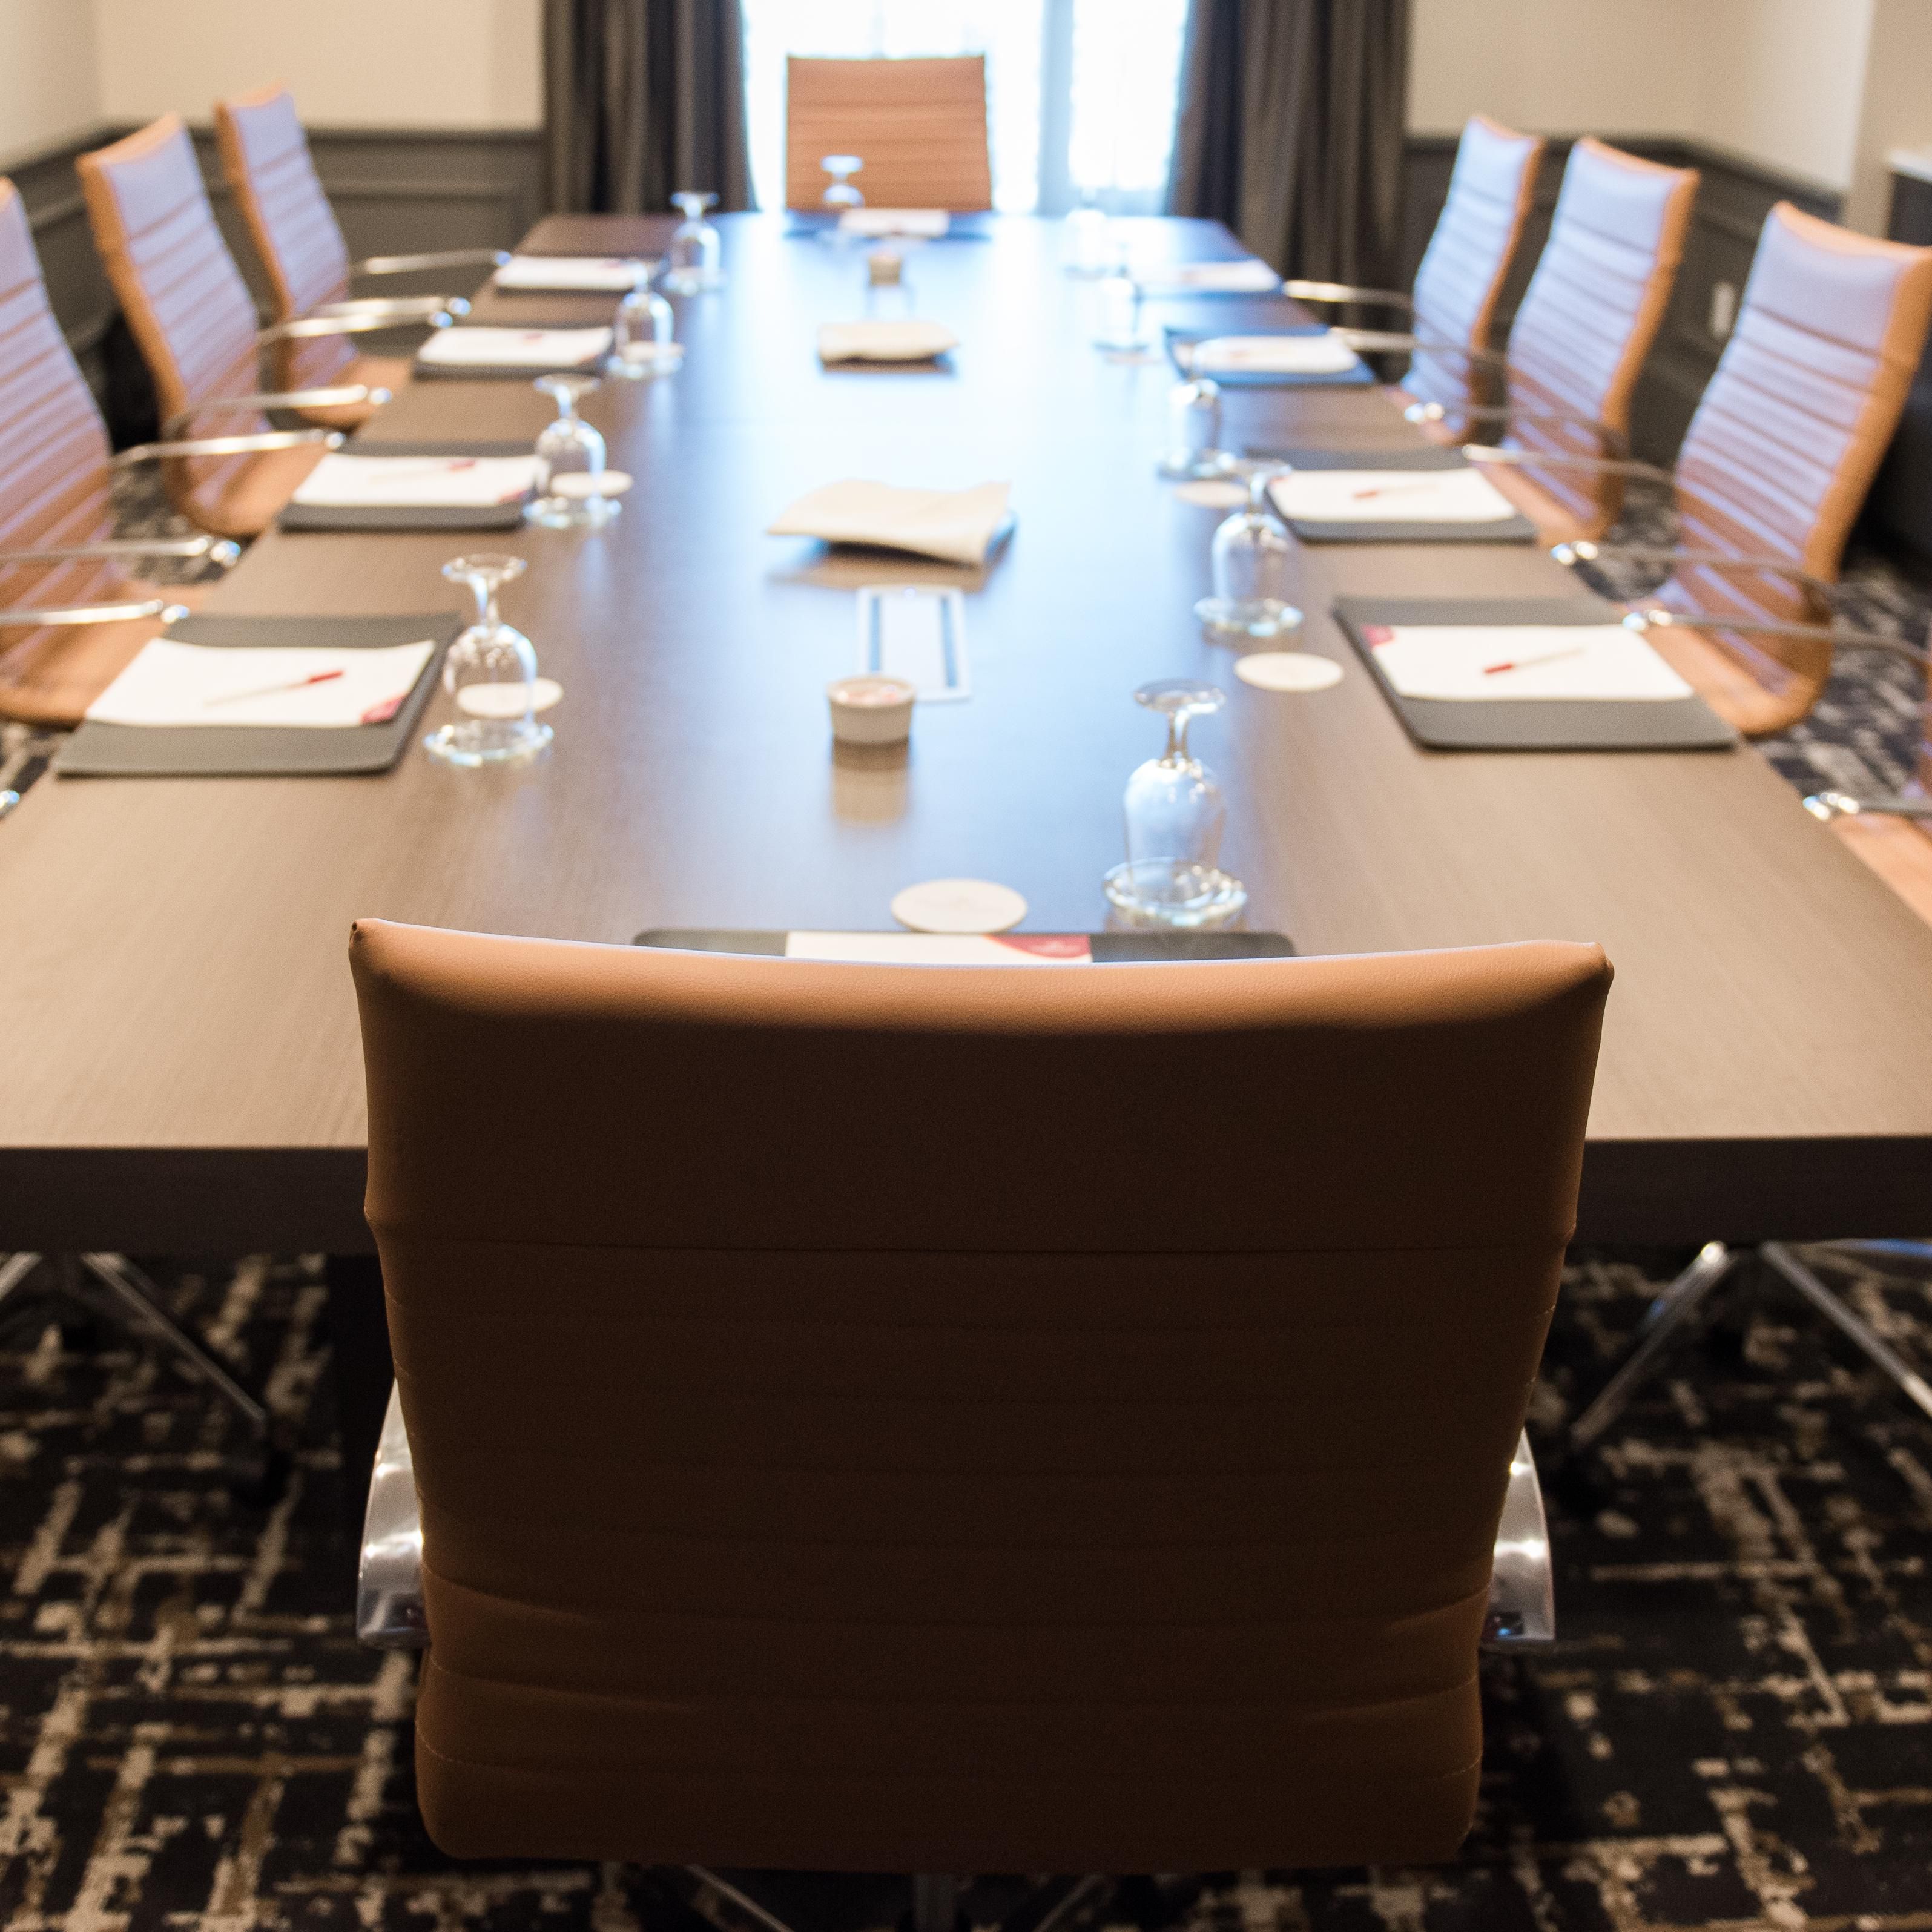 A modern space perfect for your business meetings